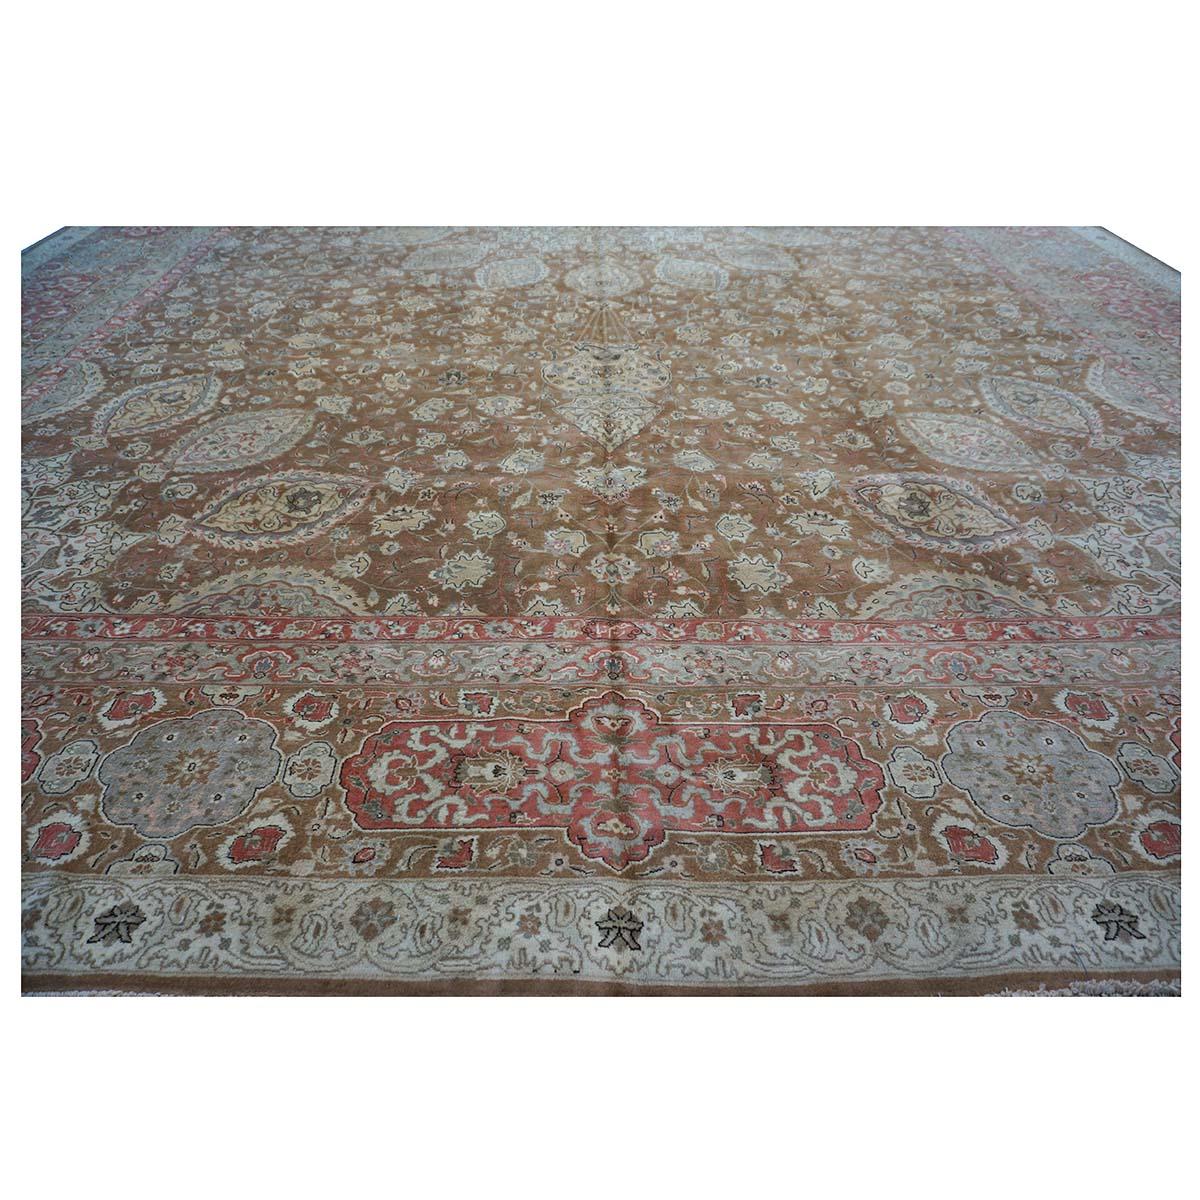 Antique 1930s Persian Tabriz 13x20 Brown & Salmon Oversized Handmade Area Rug For Sale 8